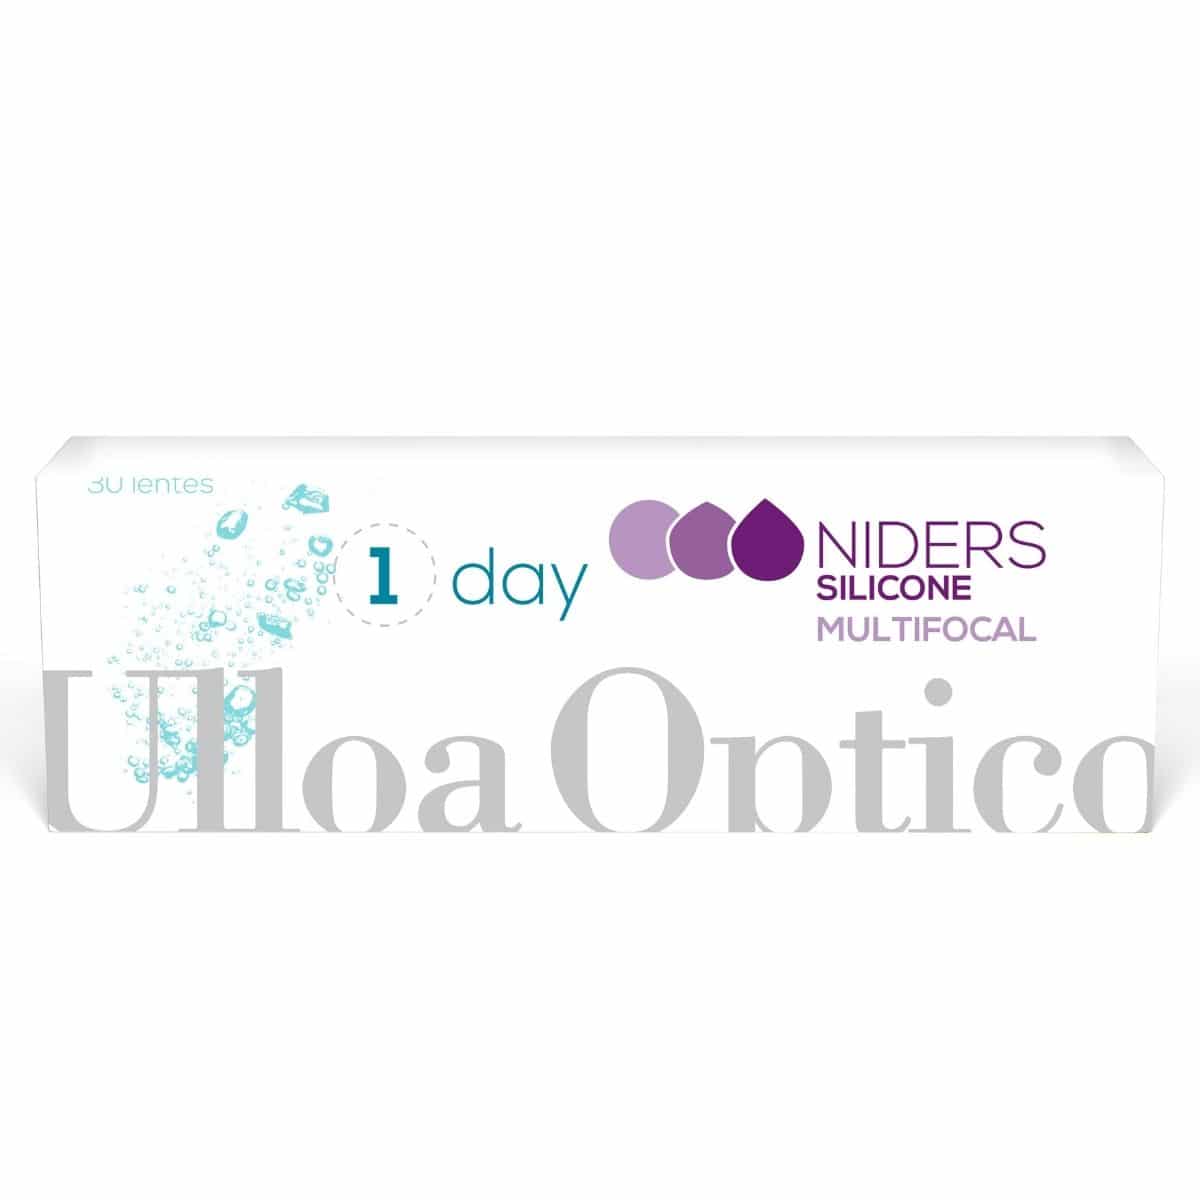 niders silicone 1 day multifocal